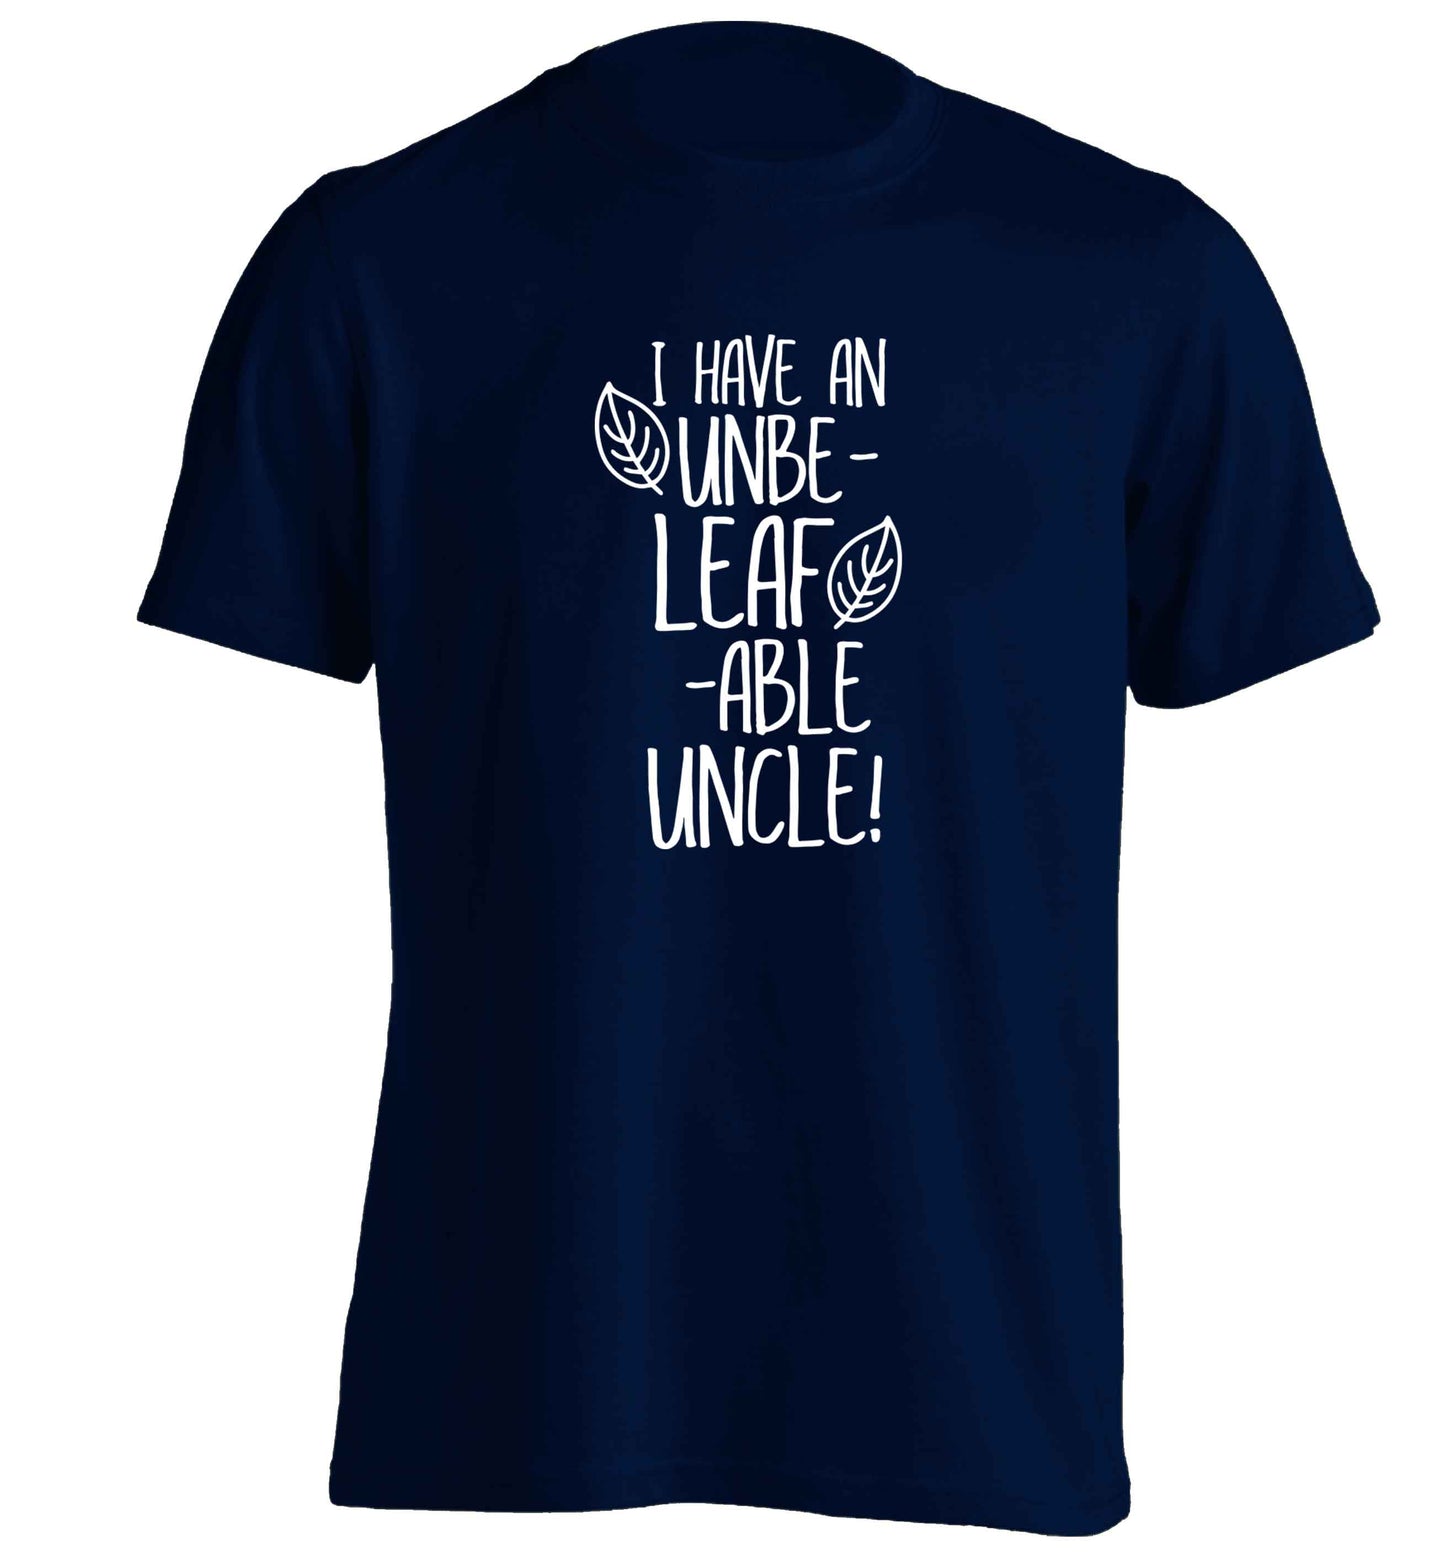 I have an unbe-leaf-able uncle adults unisex navy Tshirt 2XL